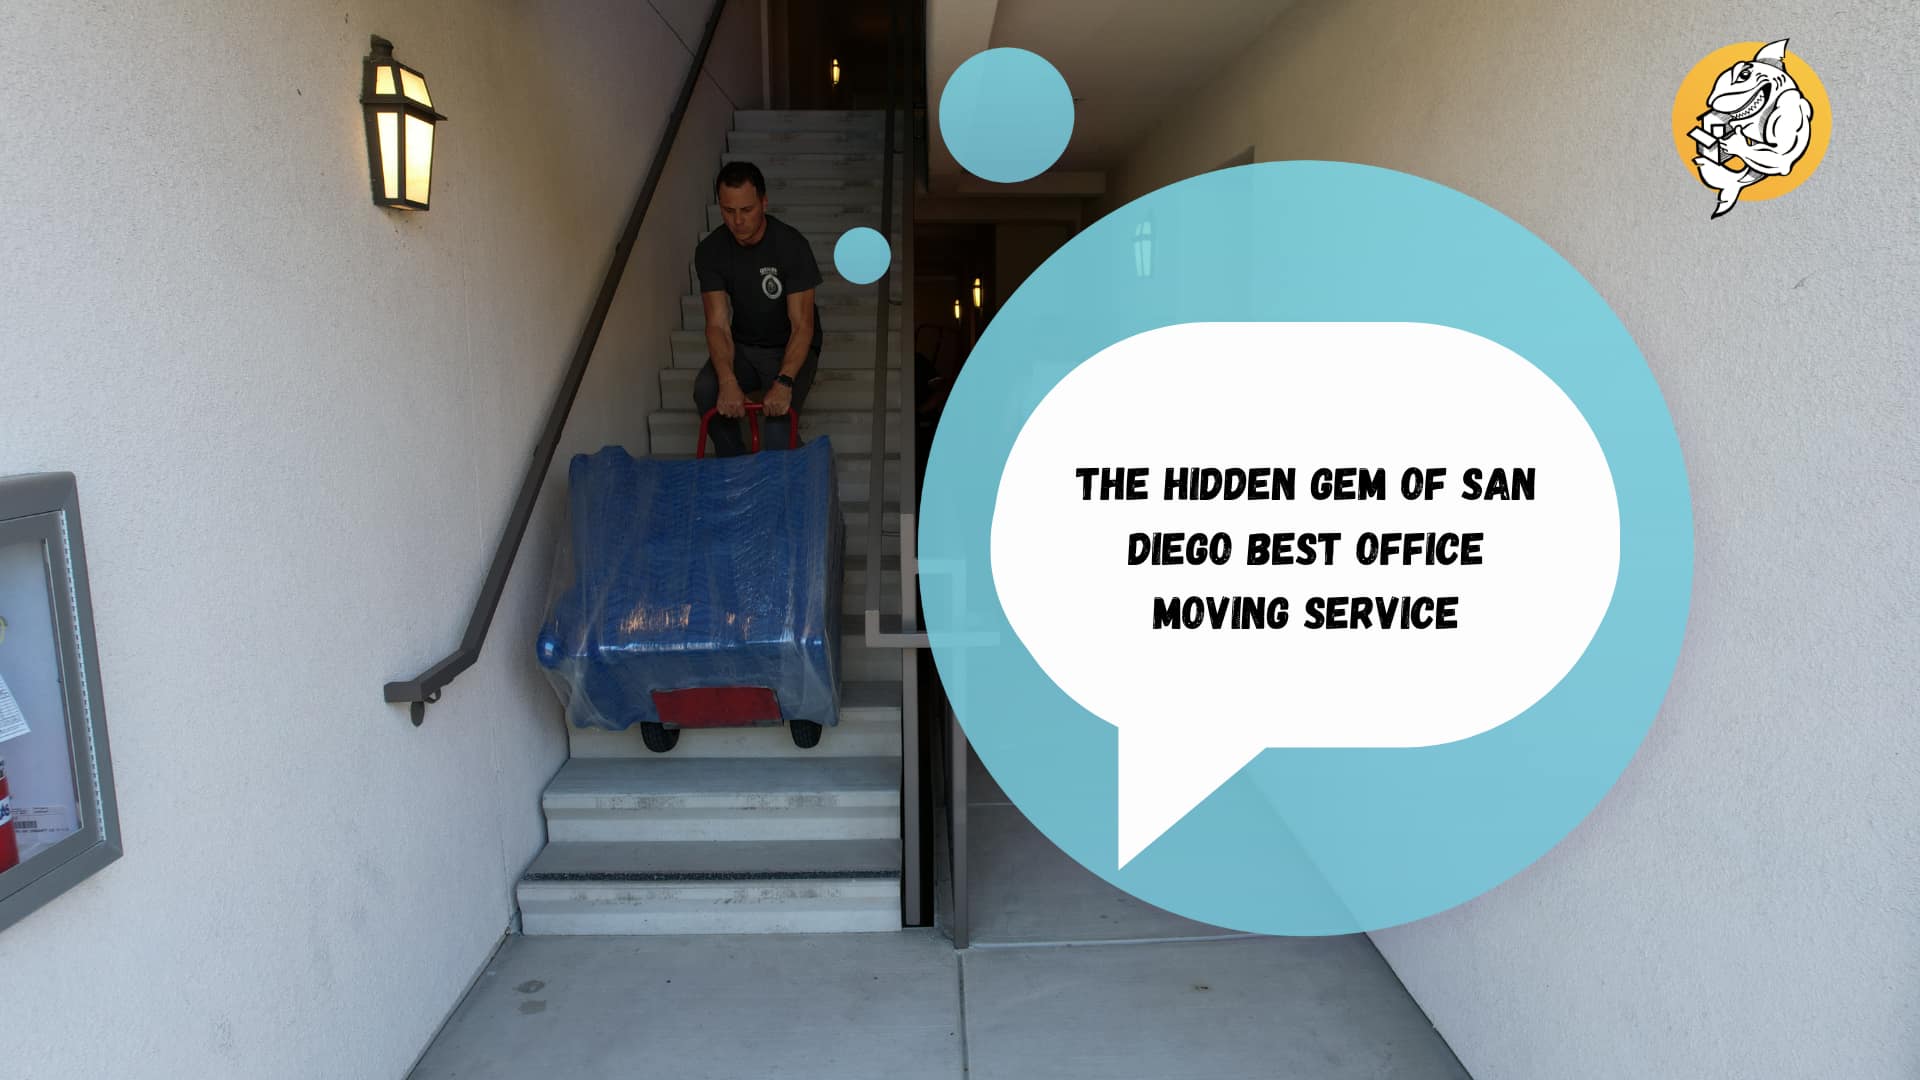 San Diego Best Office Moving Services